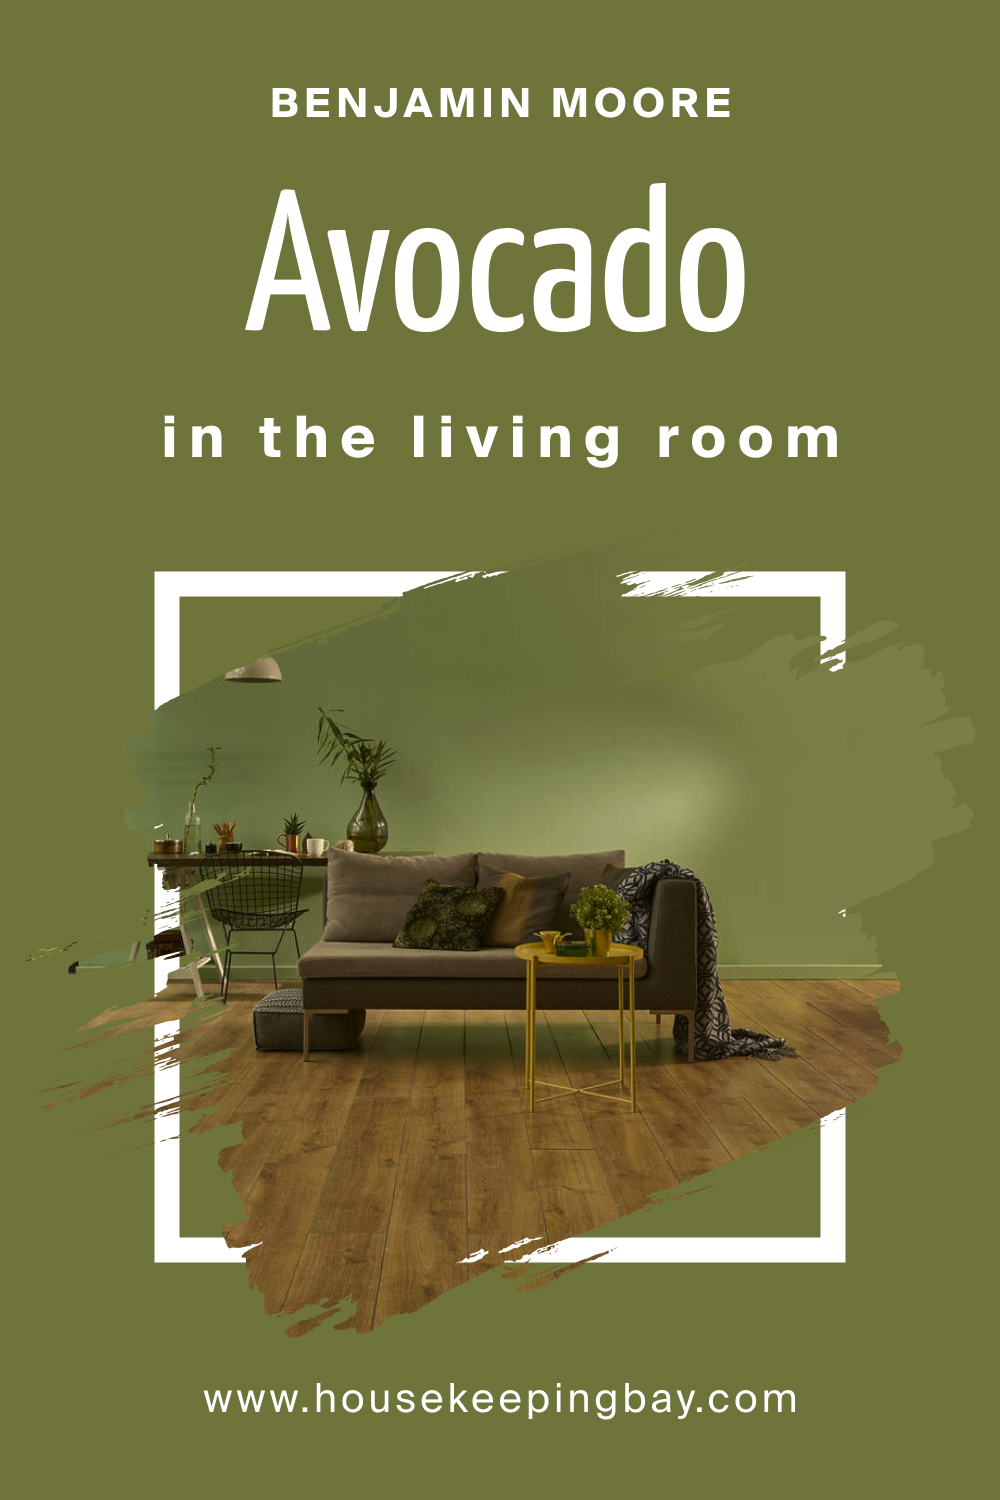 How to Use BM Avocado 2145-10 in the Living Room?